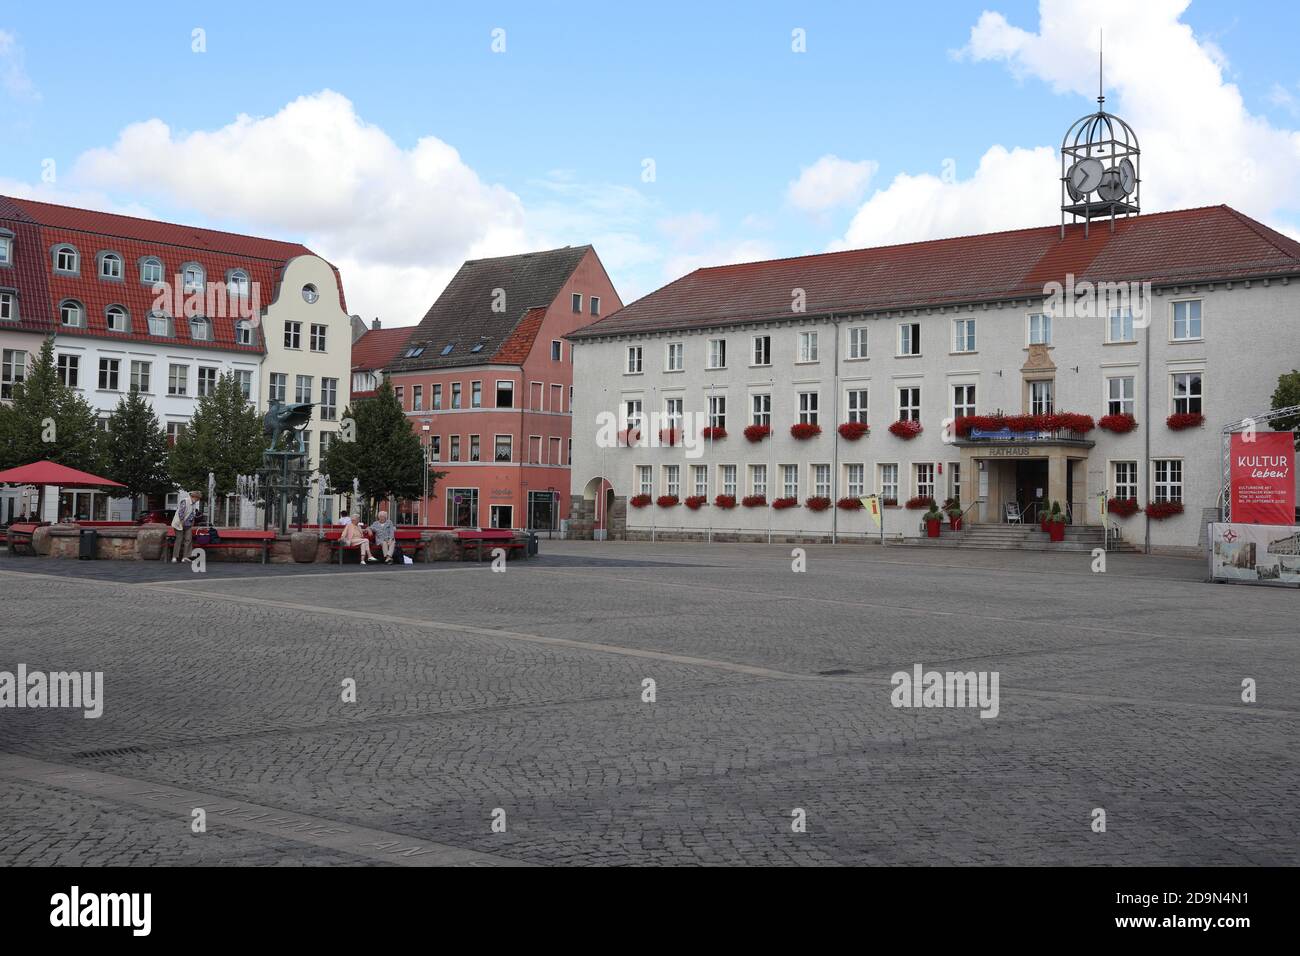 Anklam, Mecklenburg-Vorpommern/ Germany - August 24 2020: Main Square with city hall in the center of Anklam, close to the Baltic Sea, Germany Stock Photo